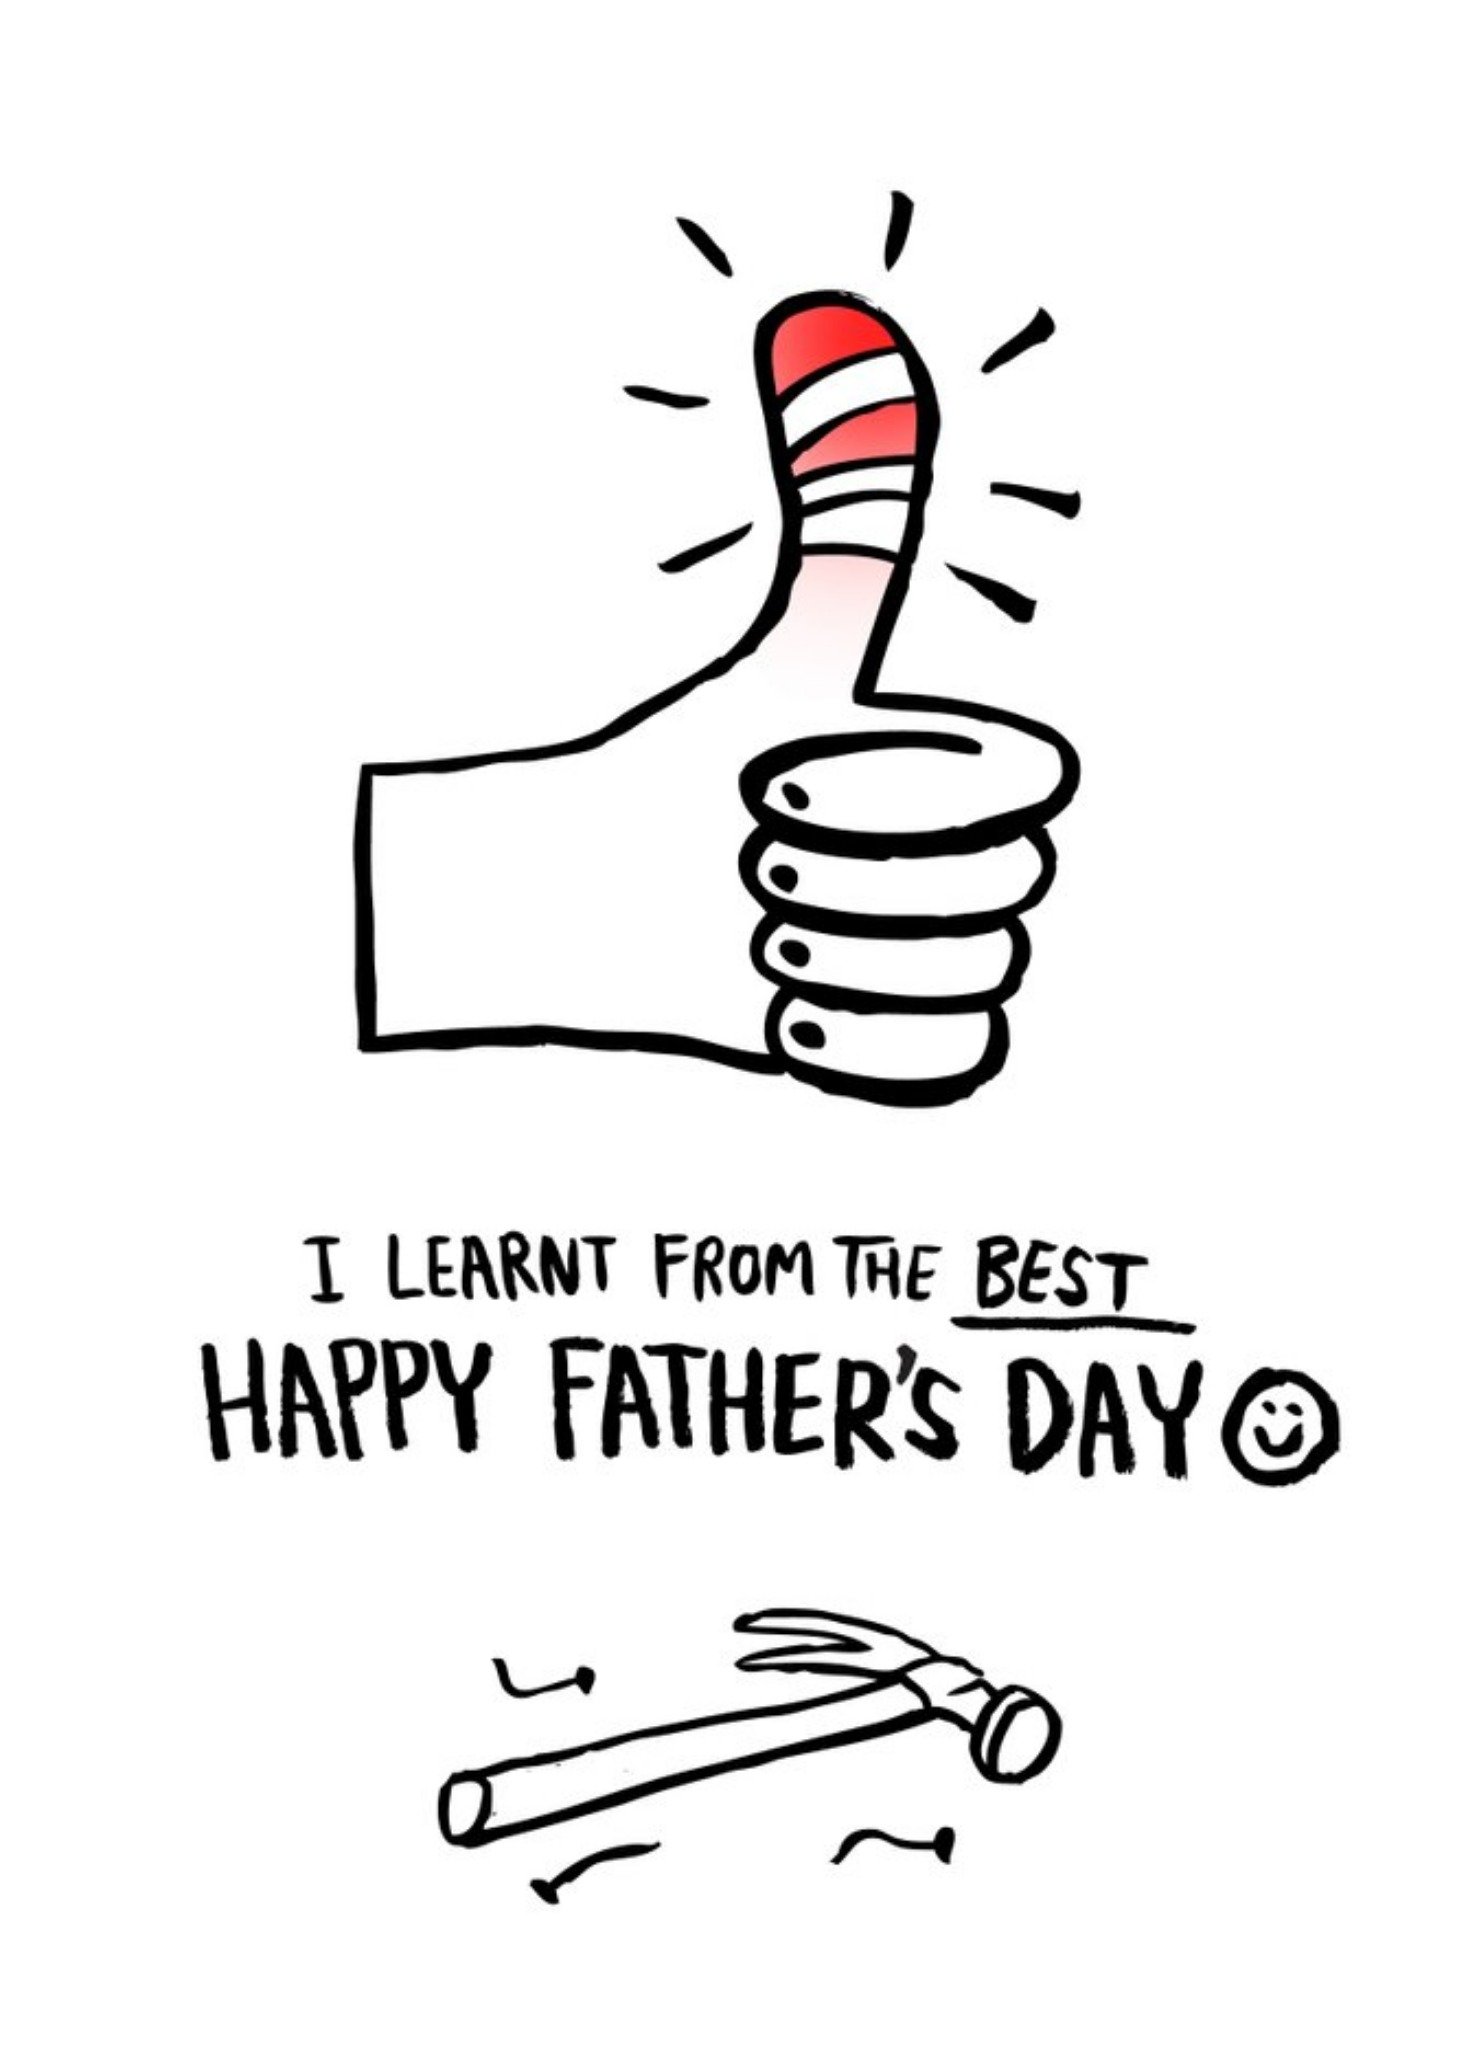 Moonpig Learnt From The Best Happy Father's Day Card Ecard